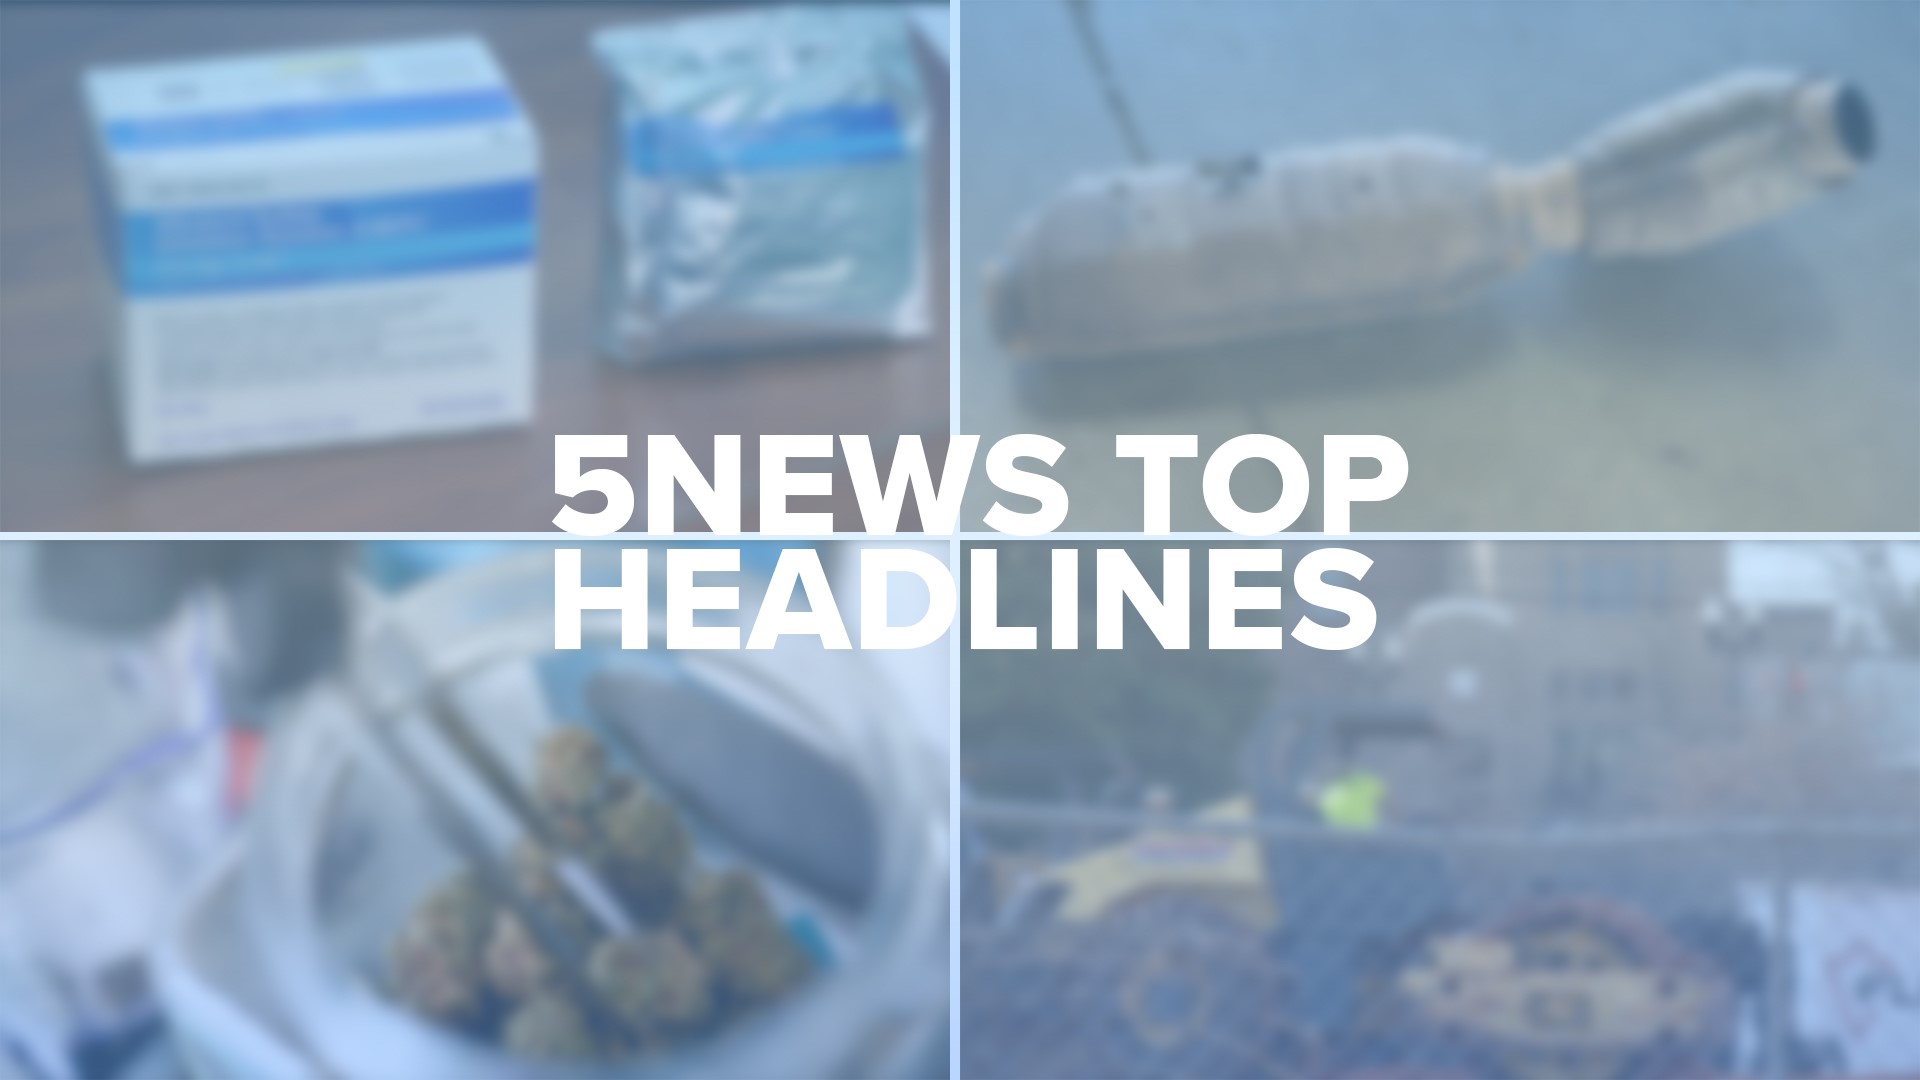 Check out today's top headlines for local news across our area!